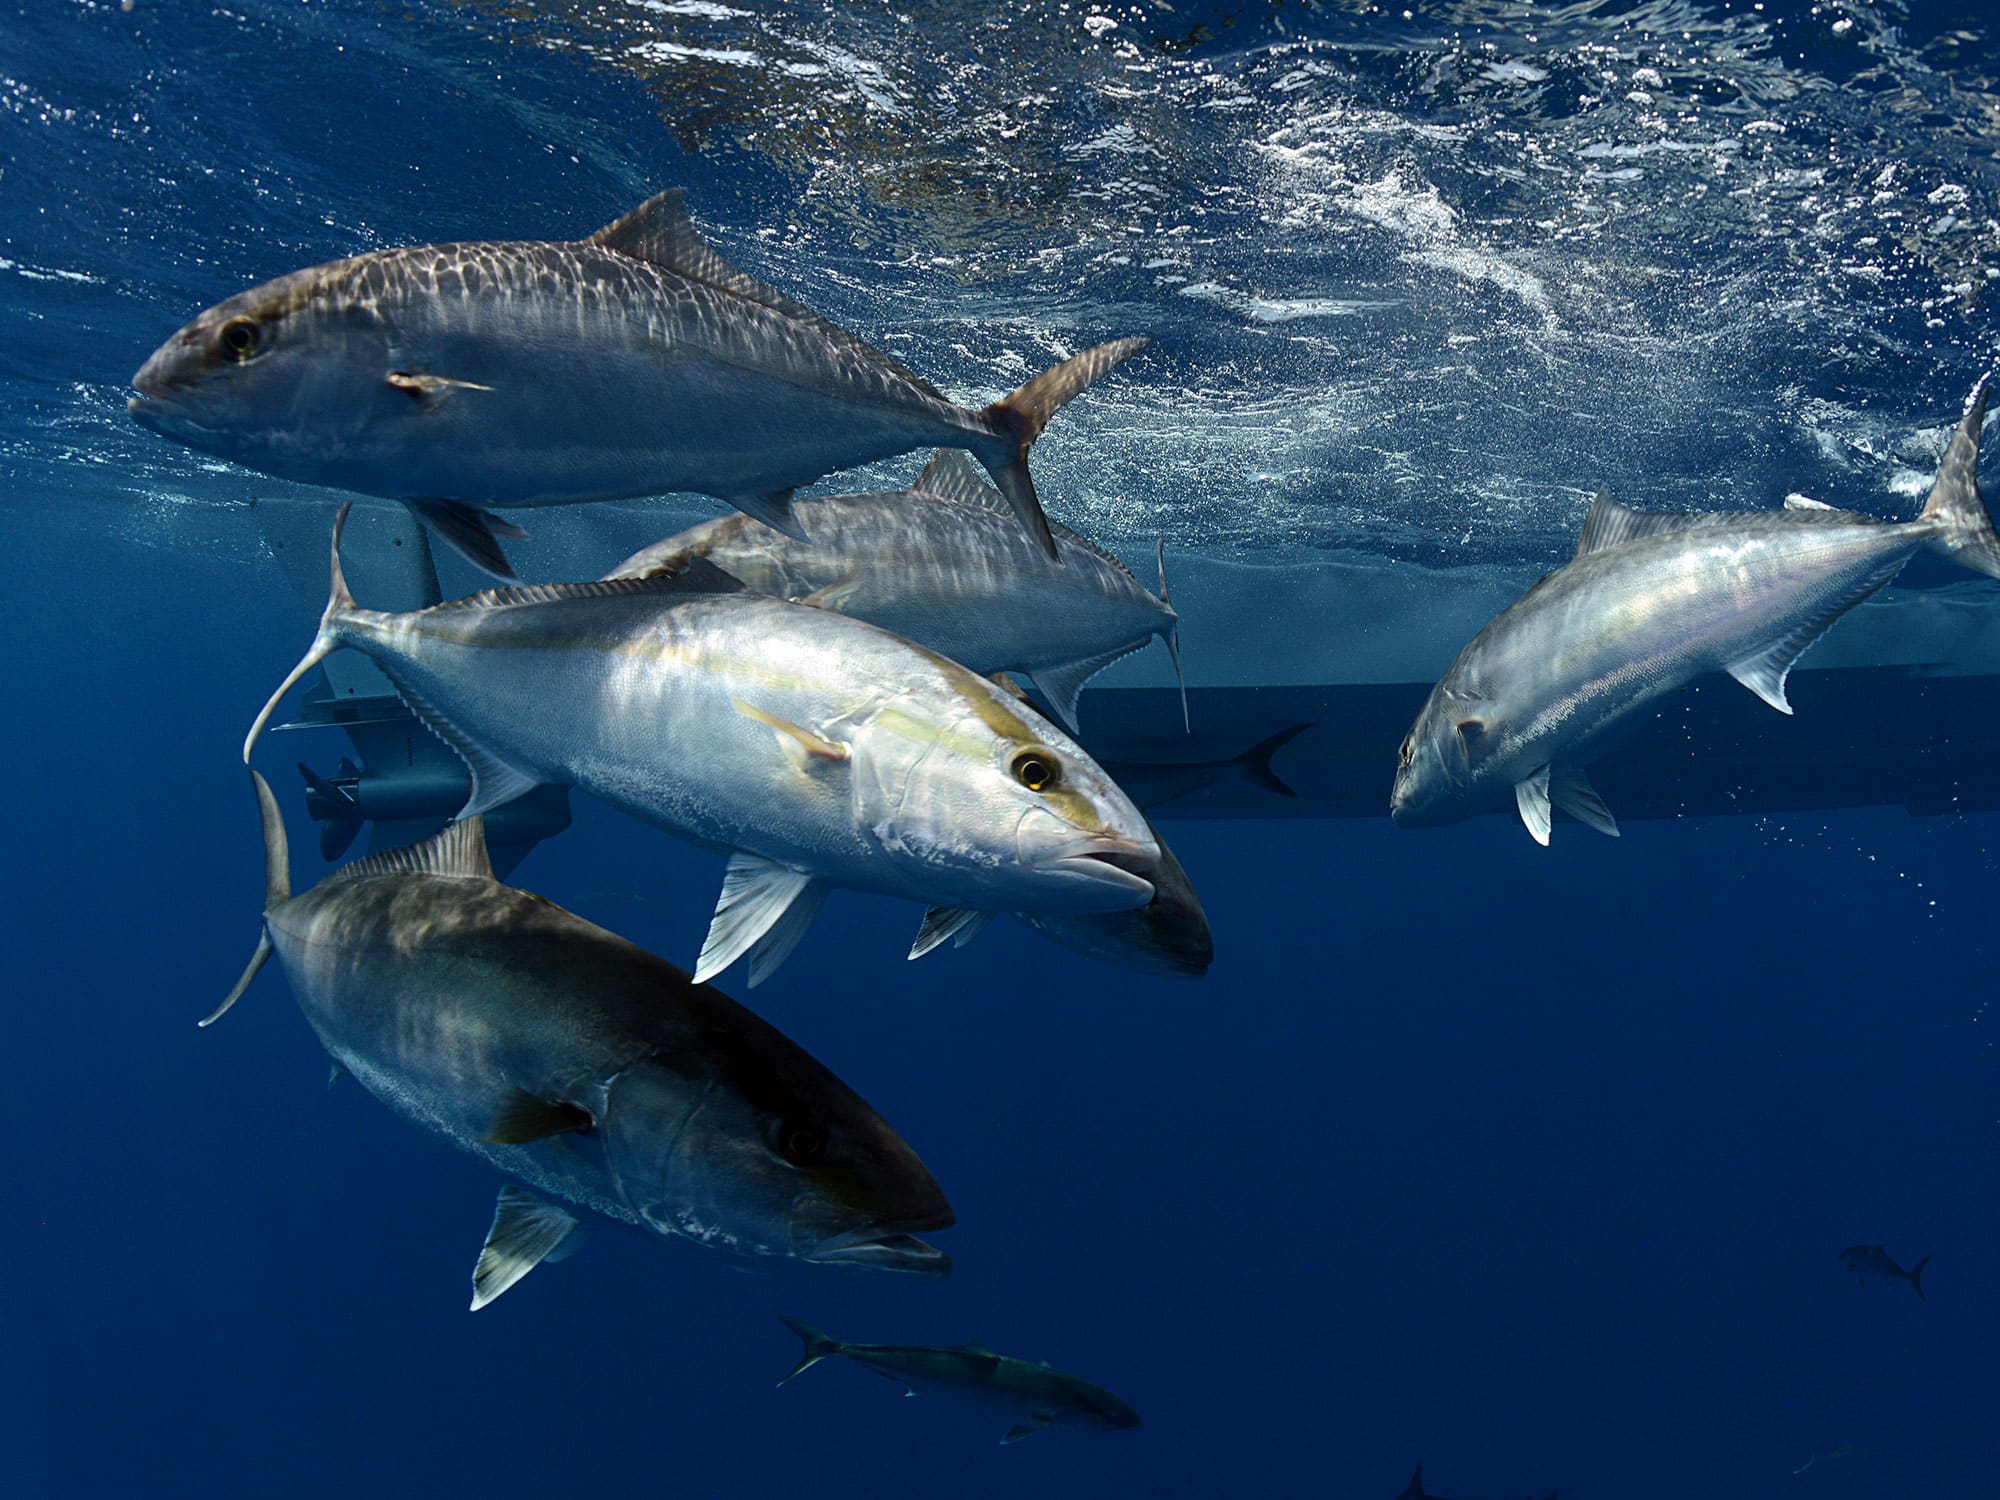 An Angler's Guide to Amberjack